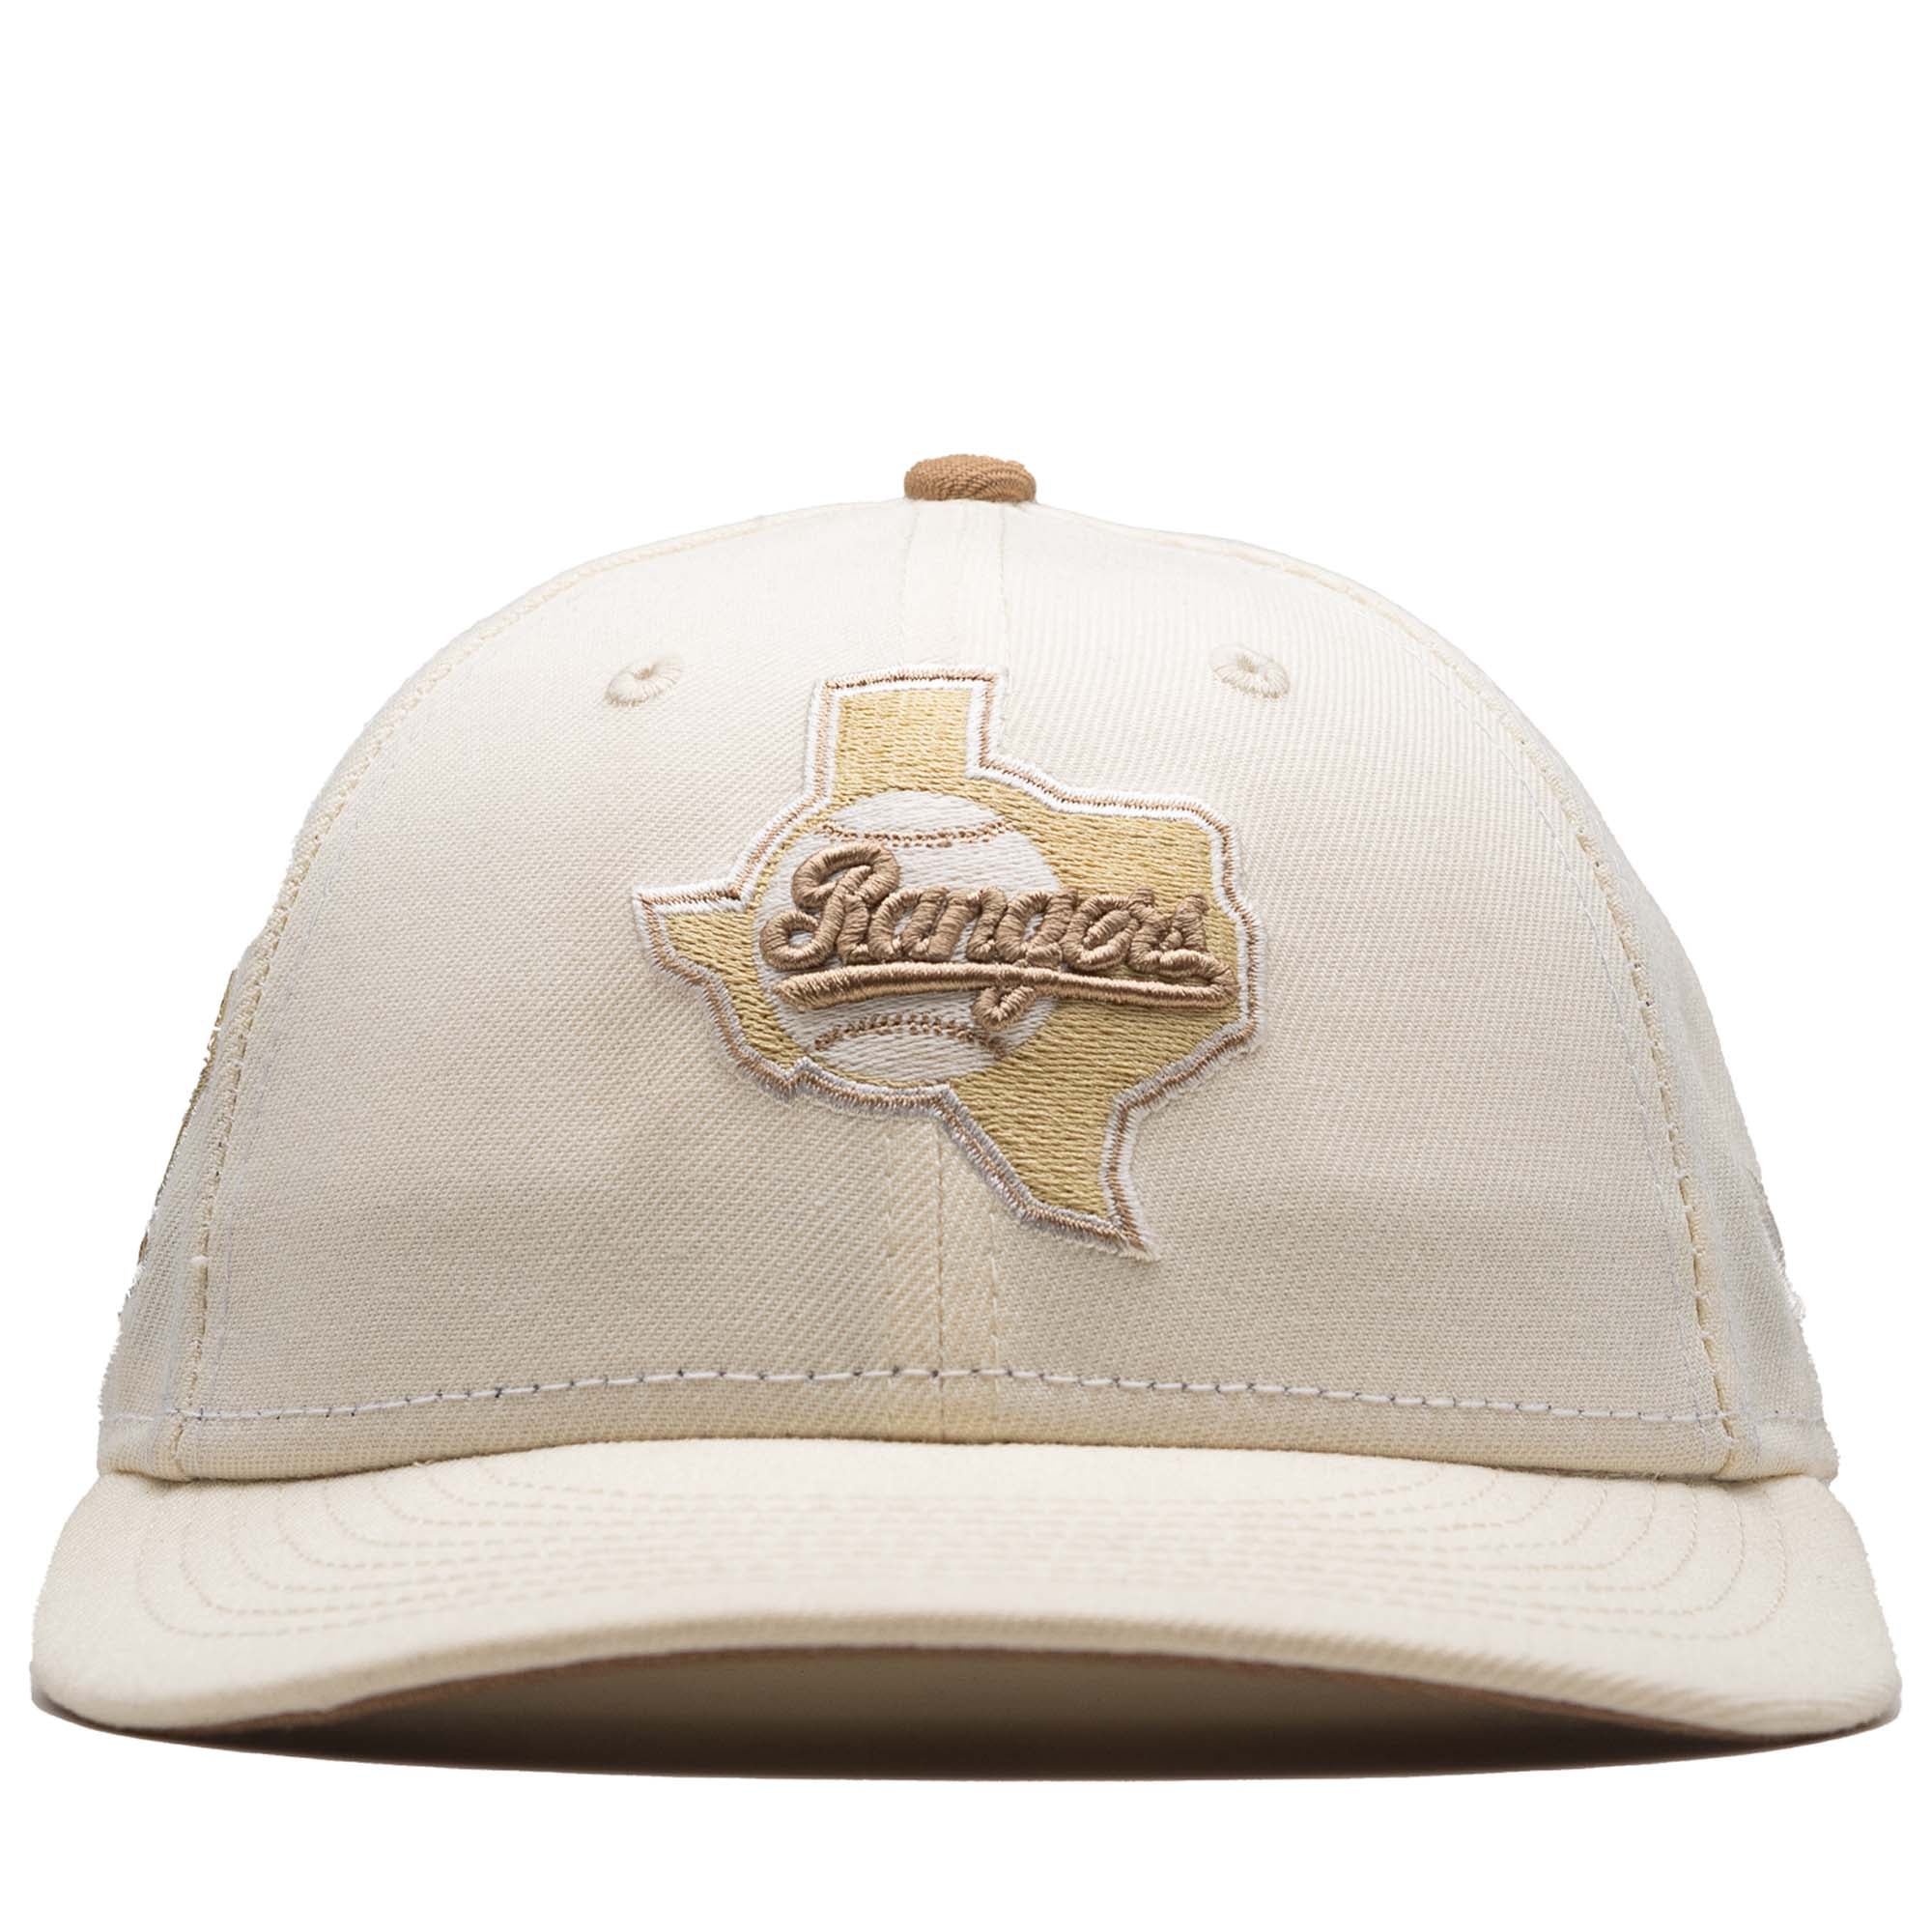 Texas Rangers Chrome White/Black New Era 59FIFTY Fitted Hat 7 1/4